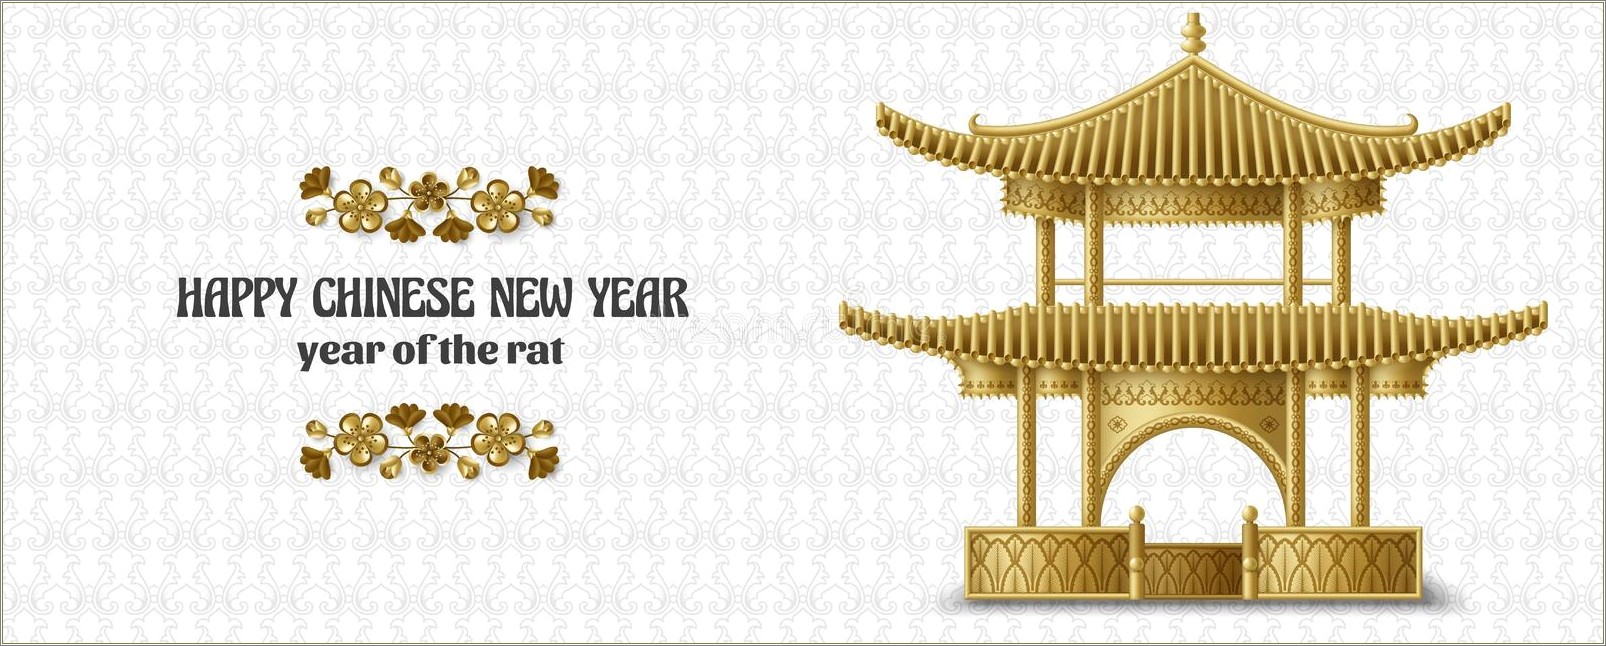 Free Pagoda Images Templates For Cards